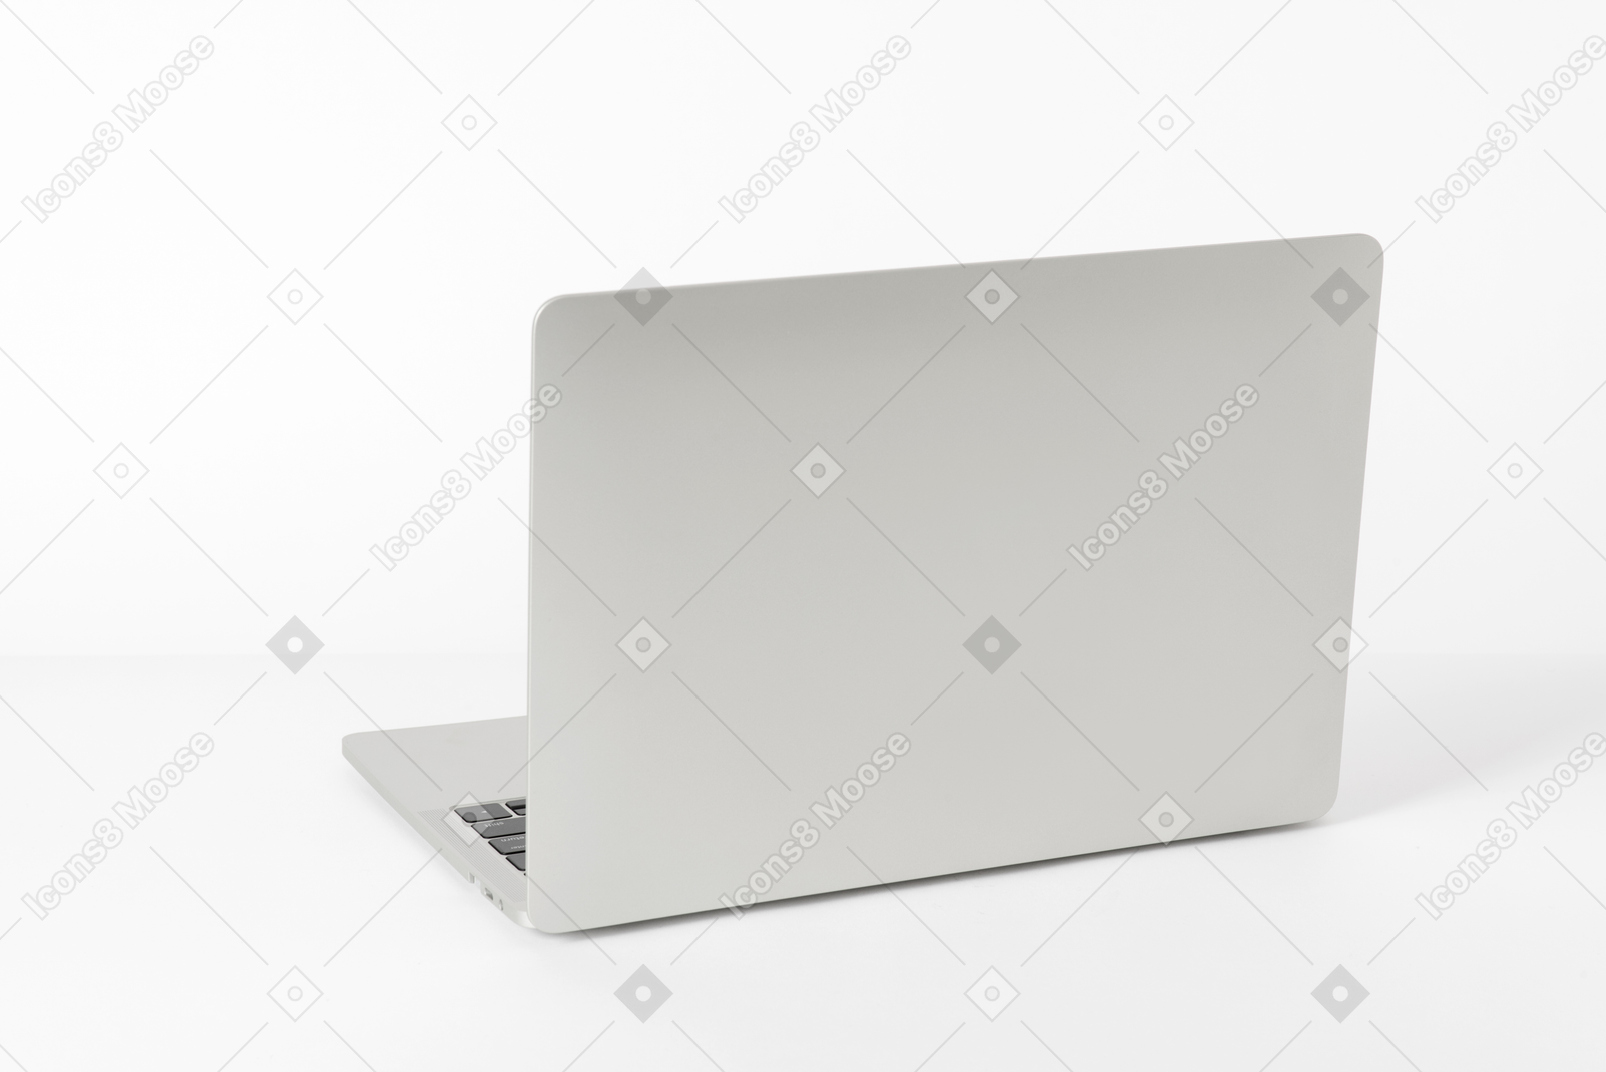 Opened laptop on a table